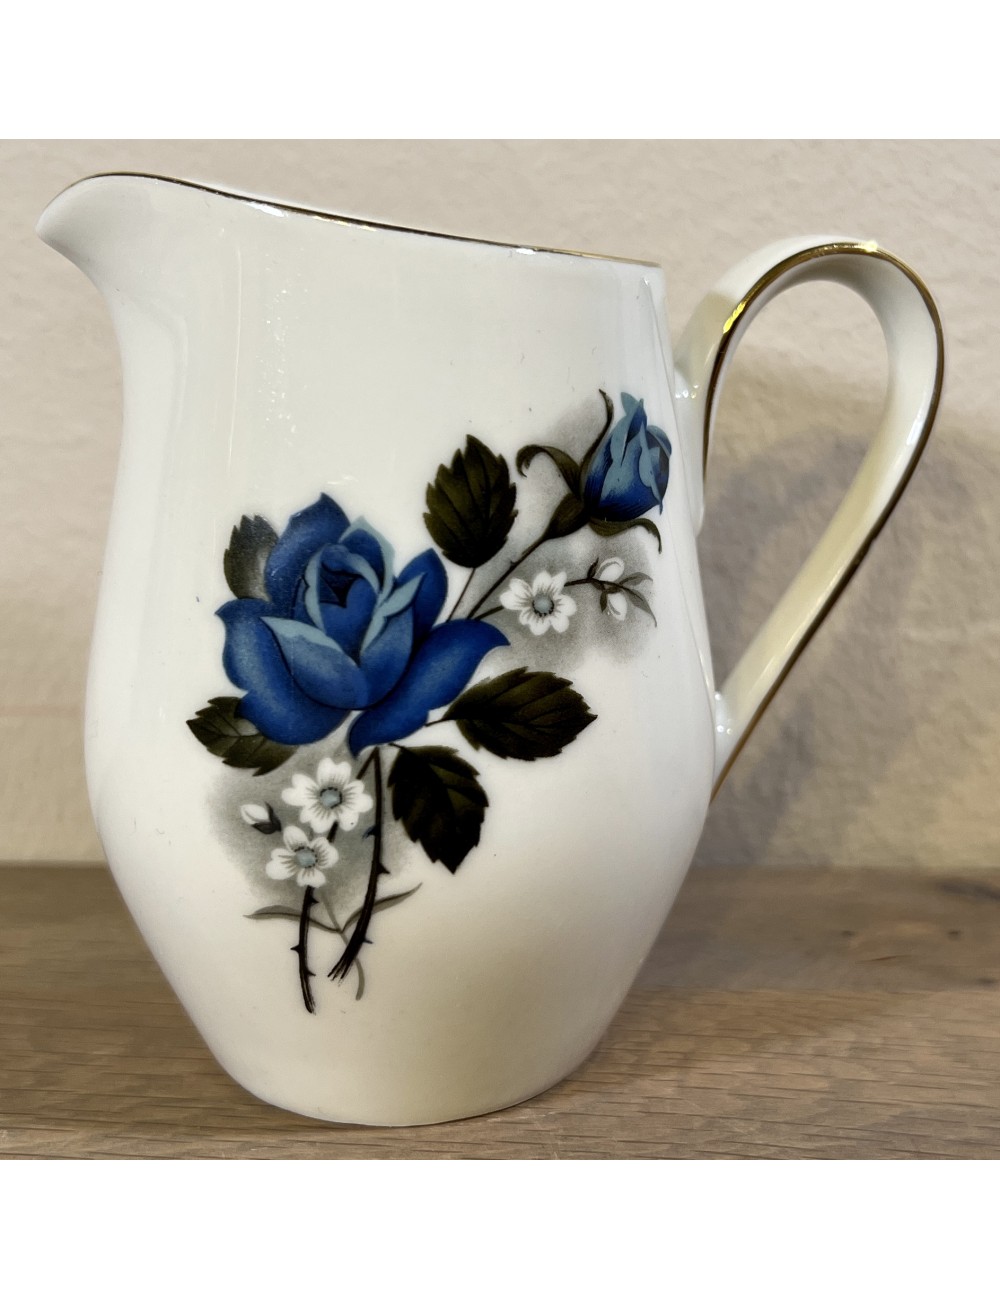 Milk jug - porcelain - Wunsiedel Bavaria - décor in white with blue with white flowers